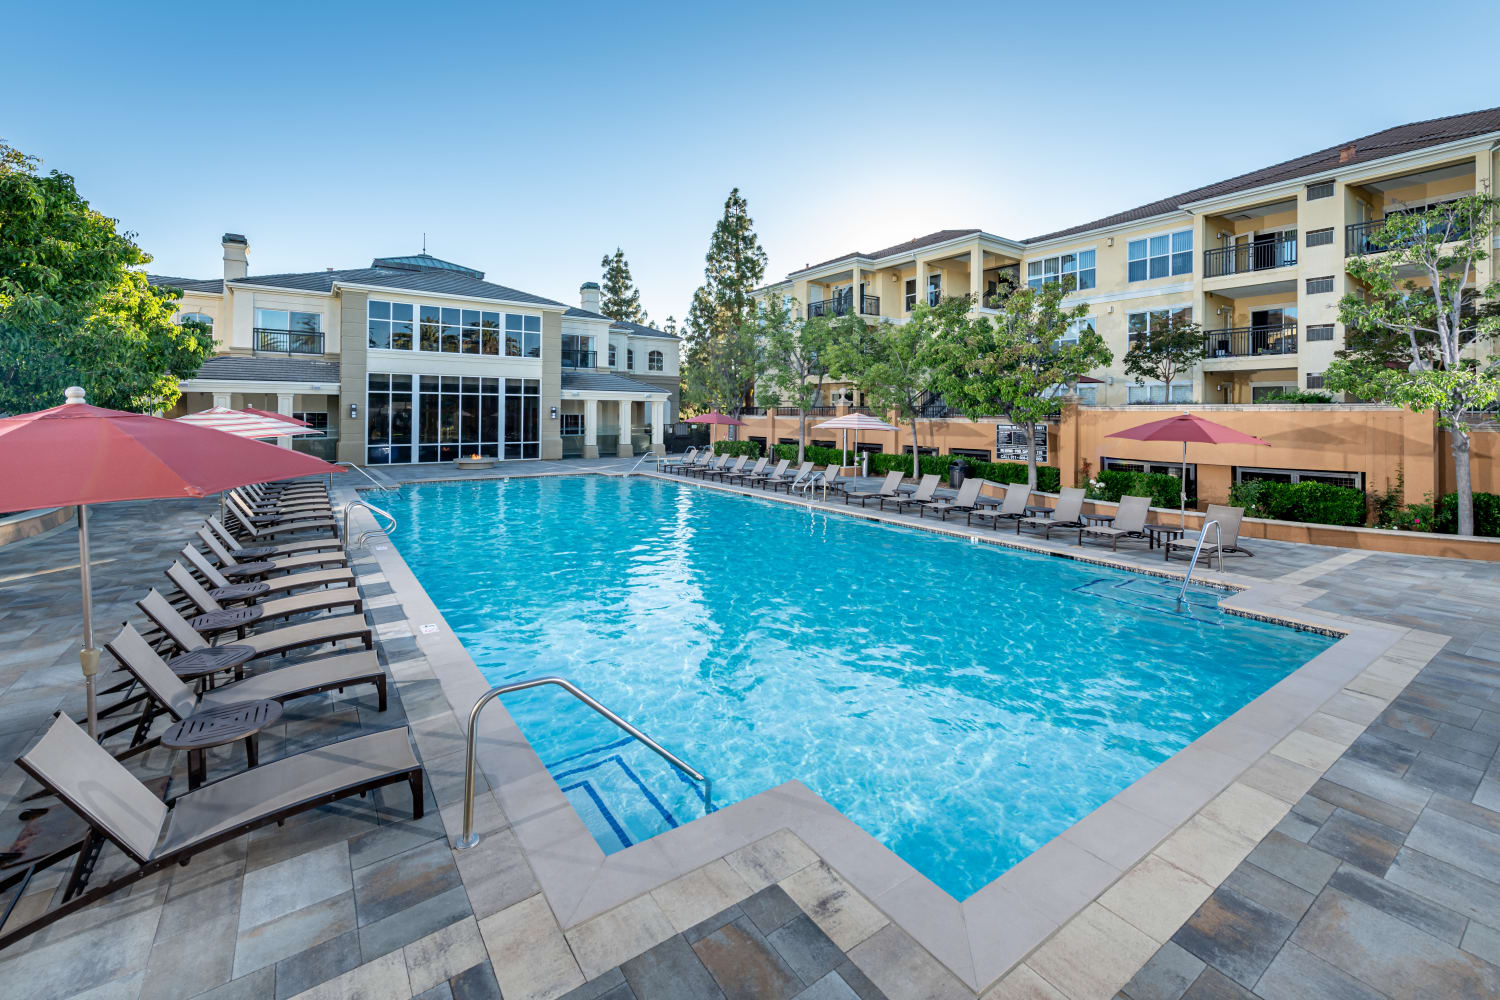 Exterior view of swimming pool at The Carlyle Apartments